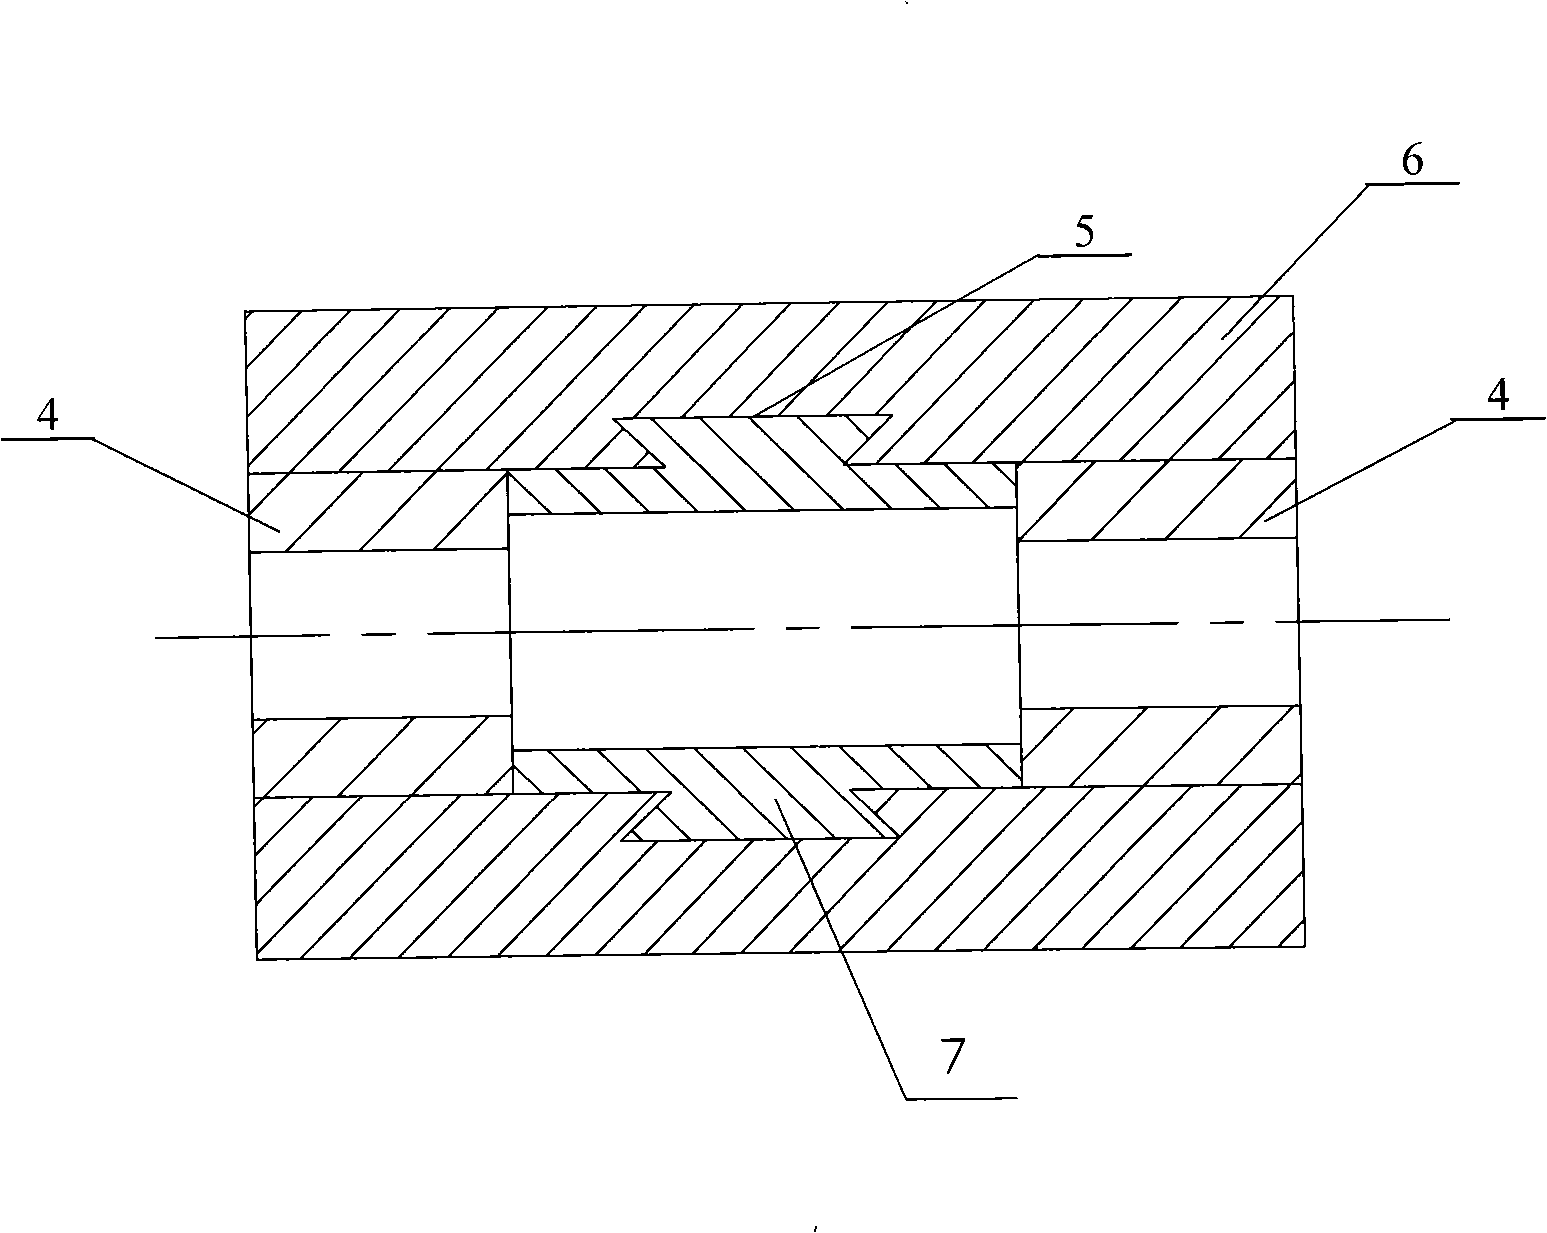 Direct foundry connection method for rare-earth permanent magnet motor rotor magnetism-isolating loop